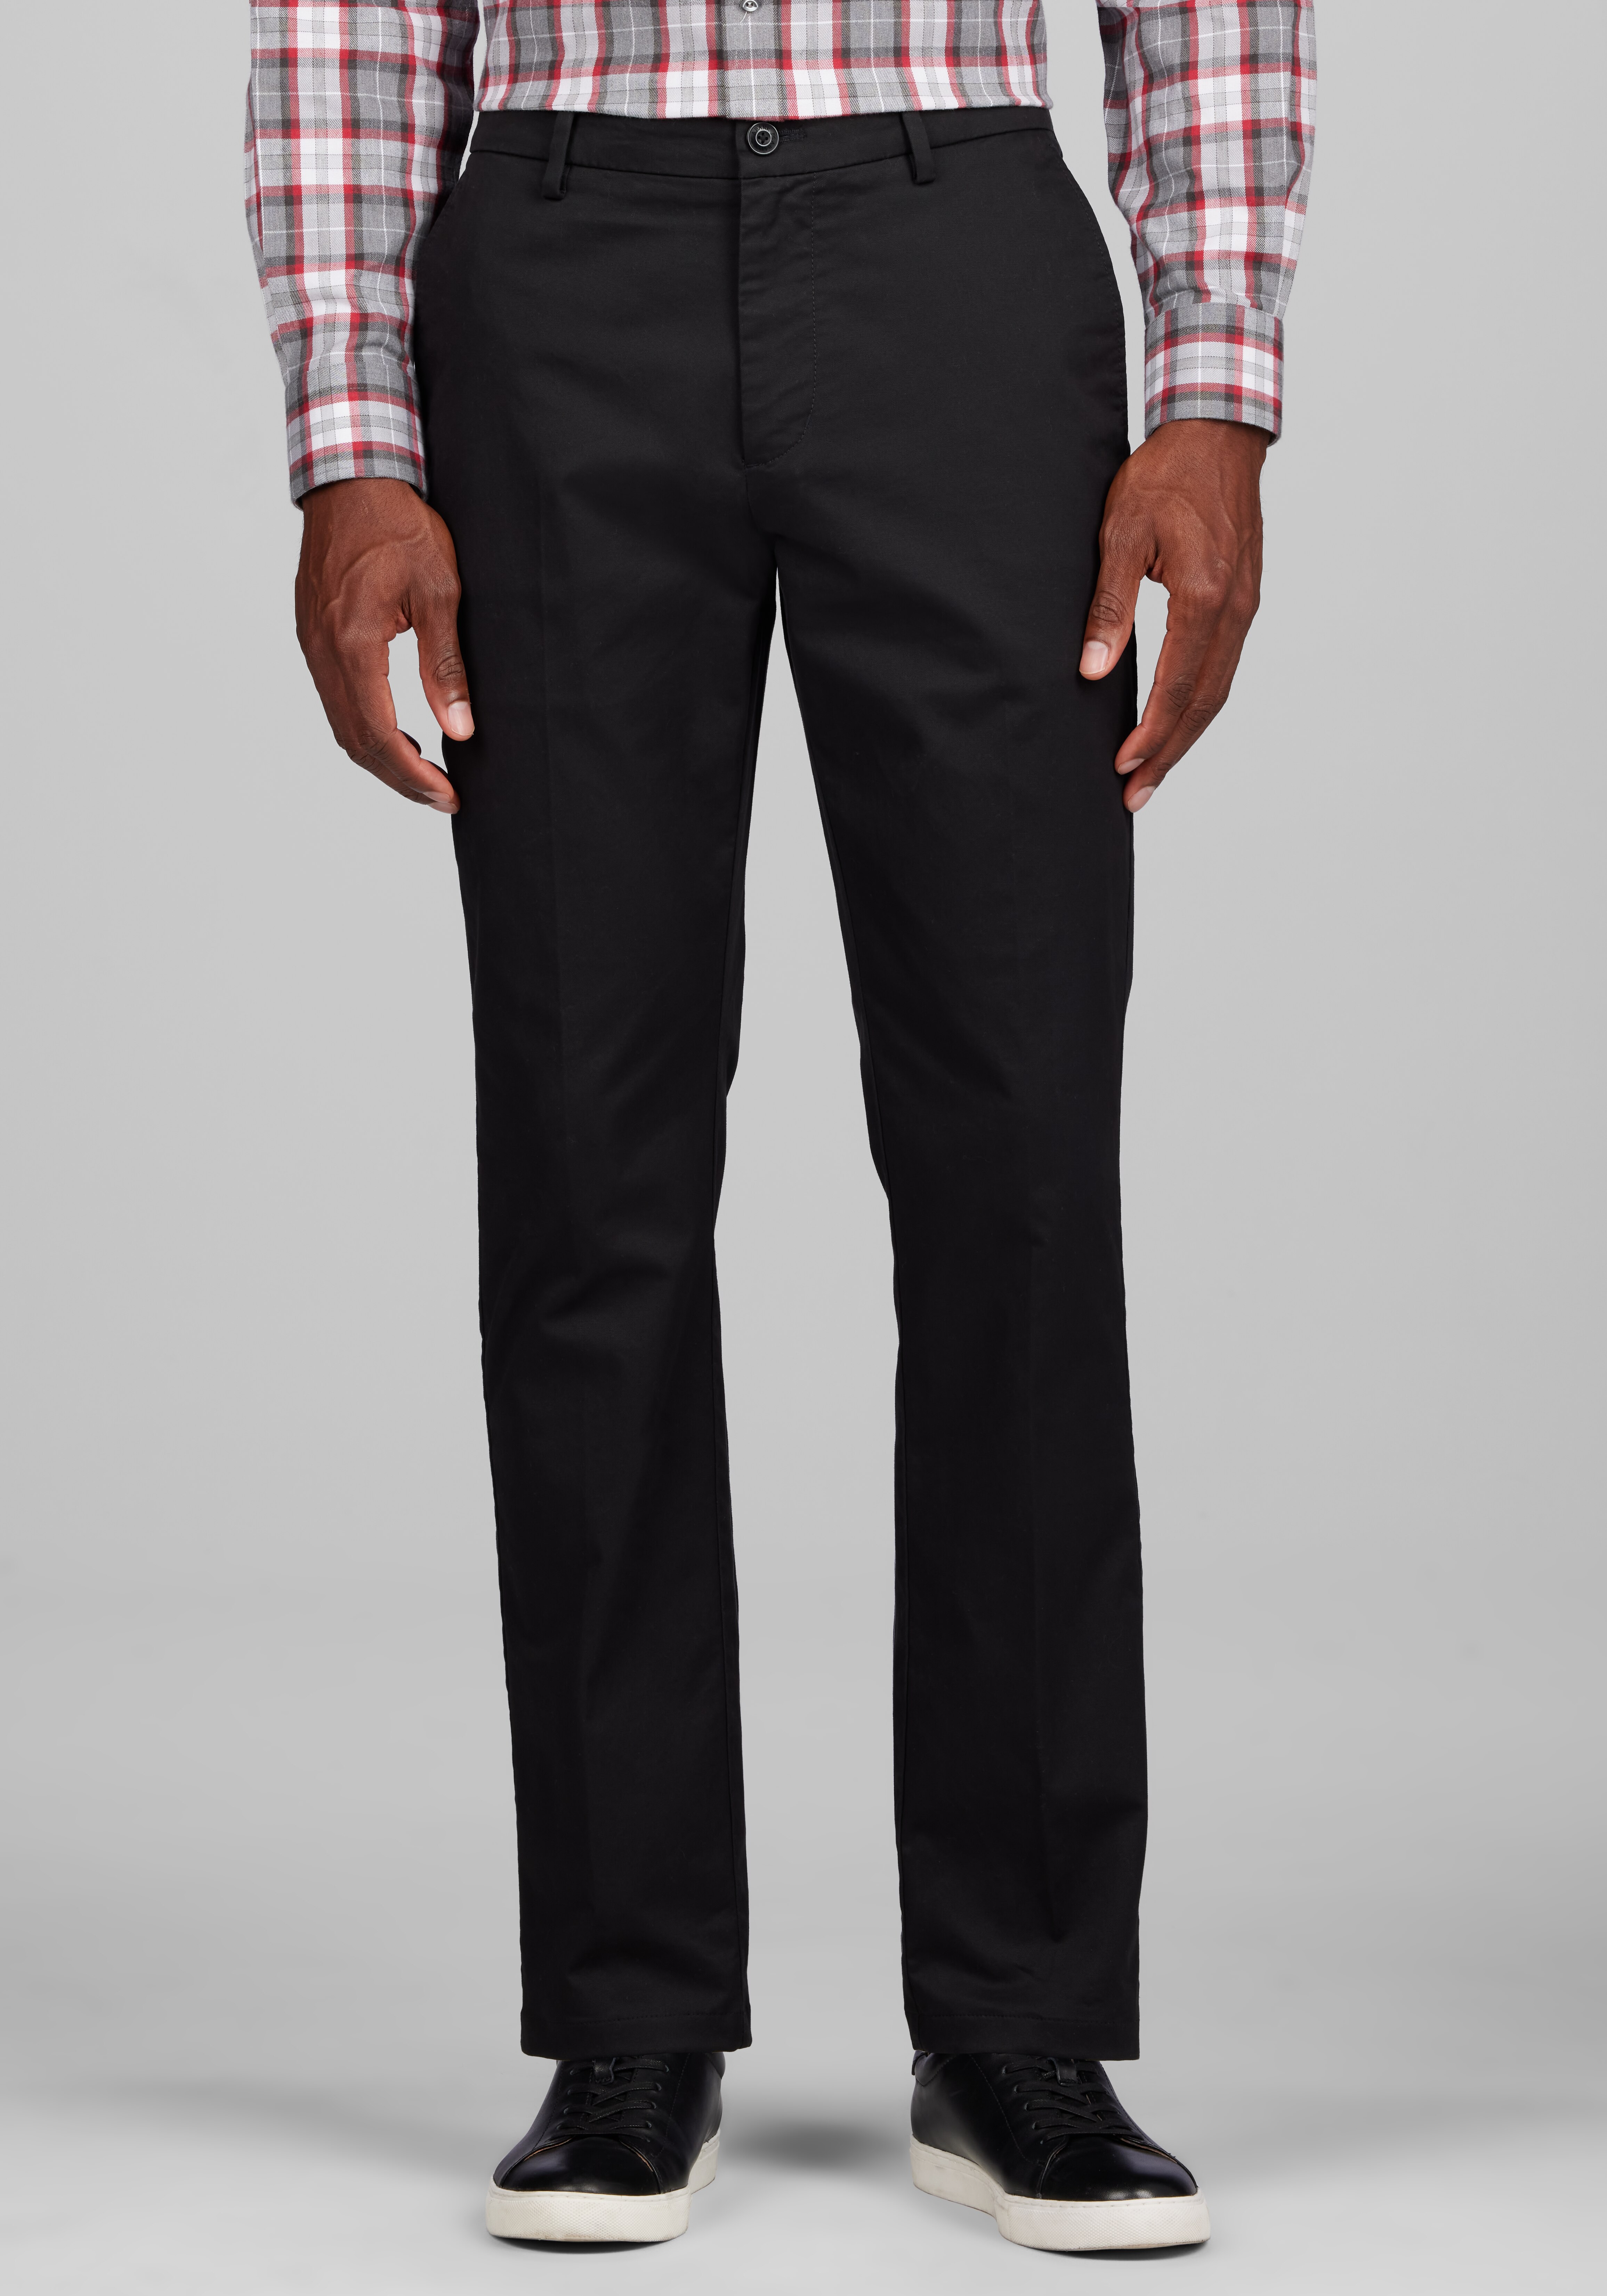 Traveler Collection Slim Fit Chino Golf Pant